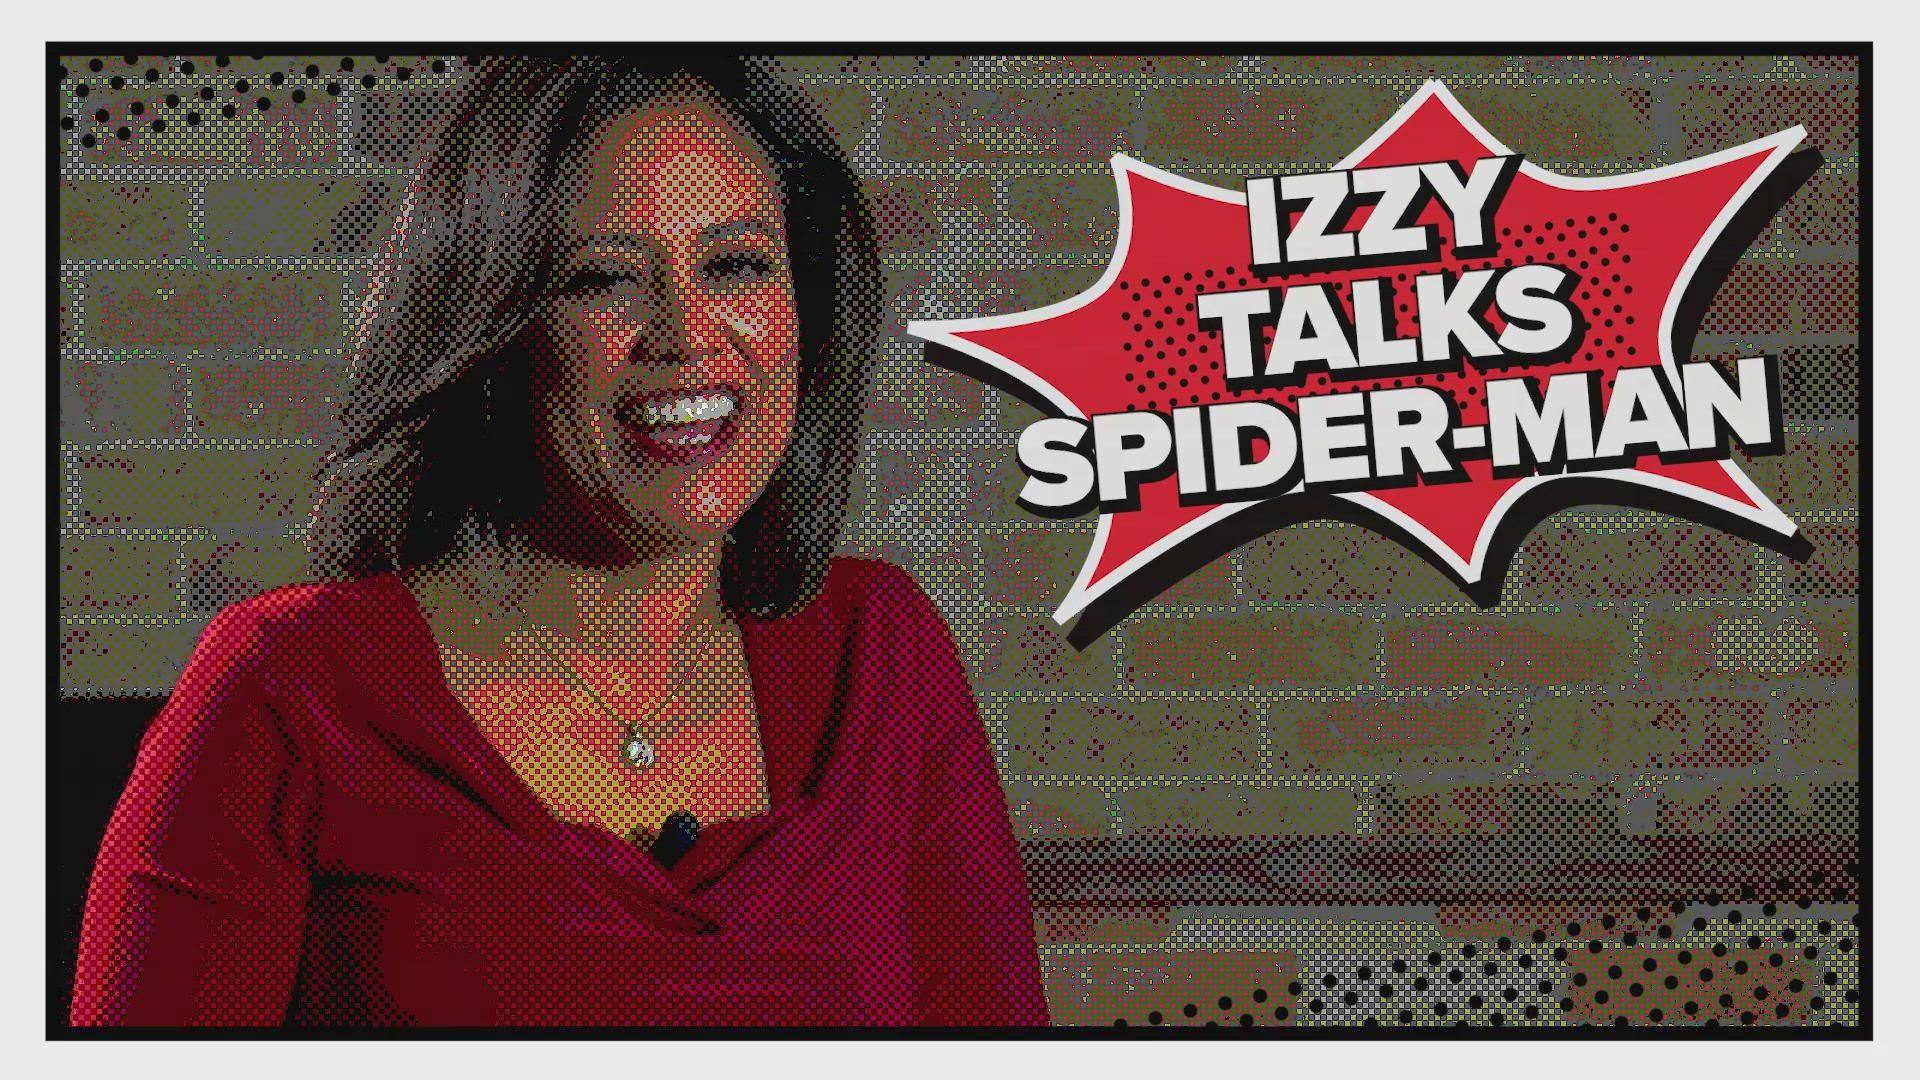 WFAA news anchor Izzy riled up the internet when she attributed a famous Spider-Man quote to Superman. But was she just trolling? Decide for yourself.